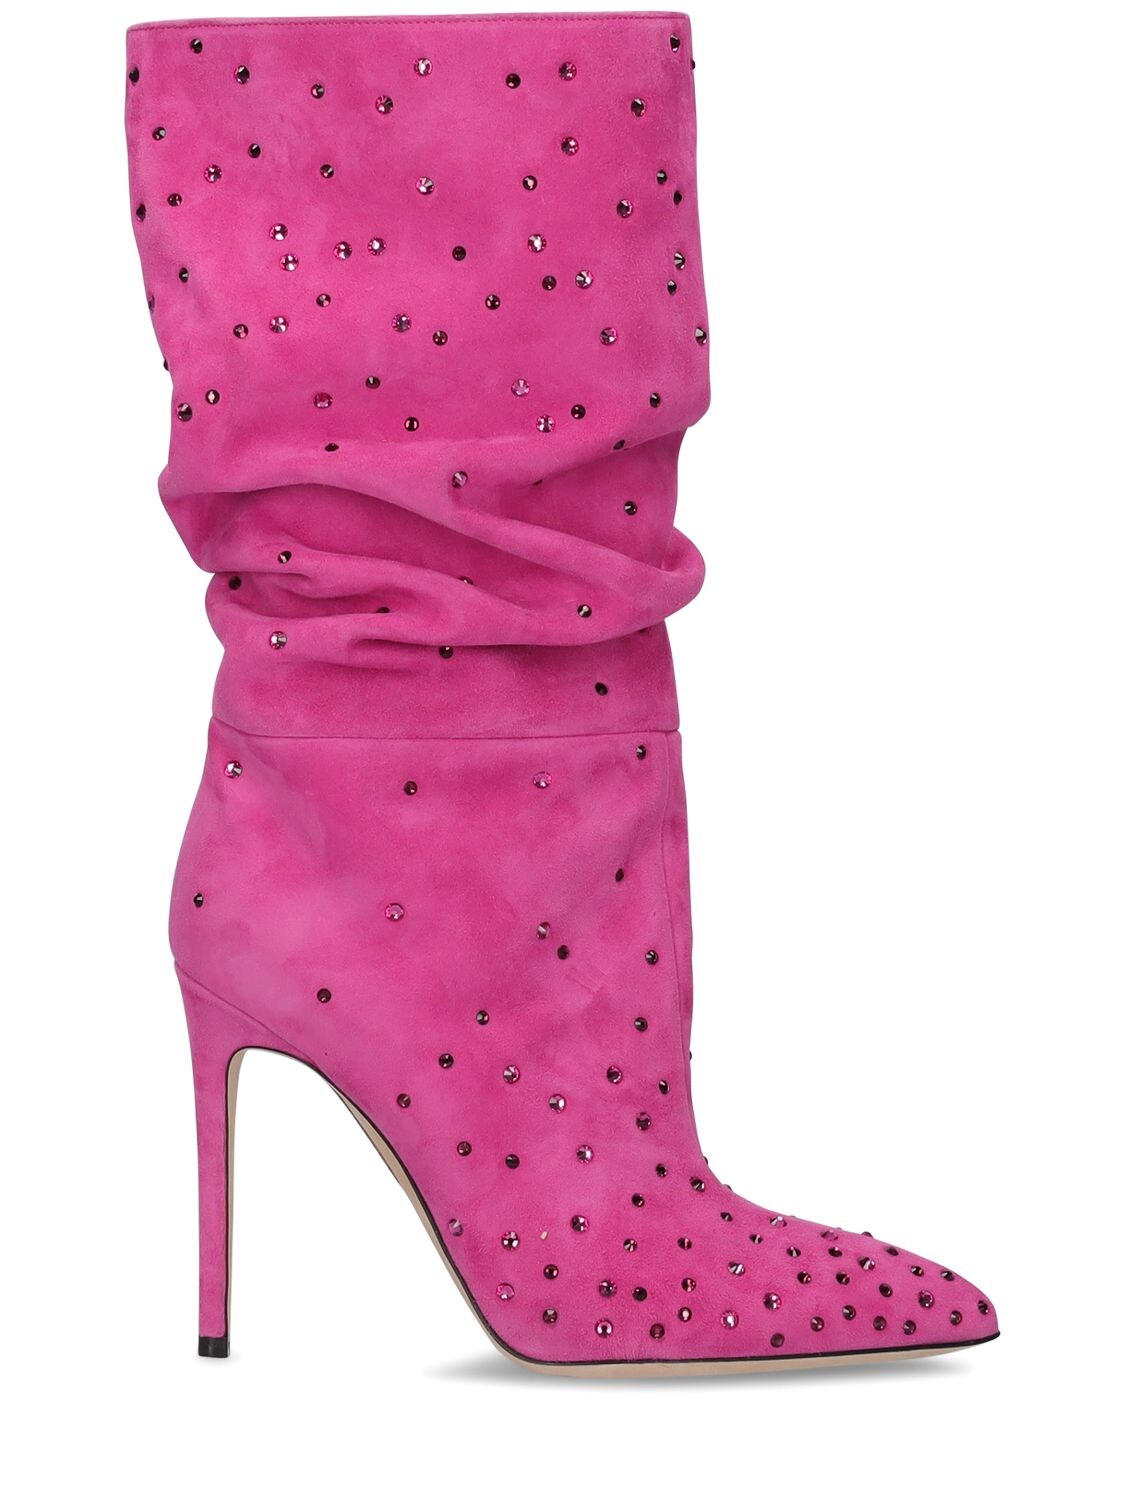 Paris Texas 105mm Holly Slouchy Suede Boots In Fuchsia